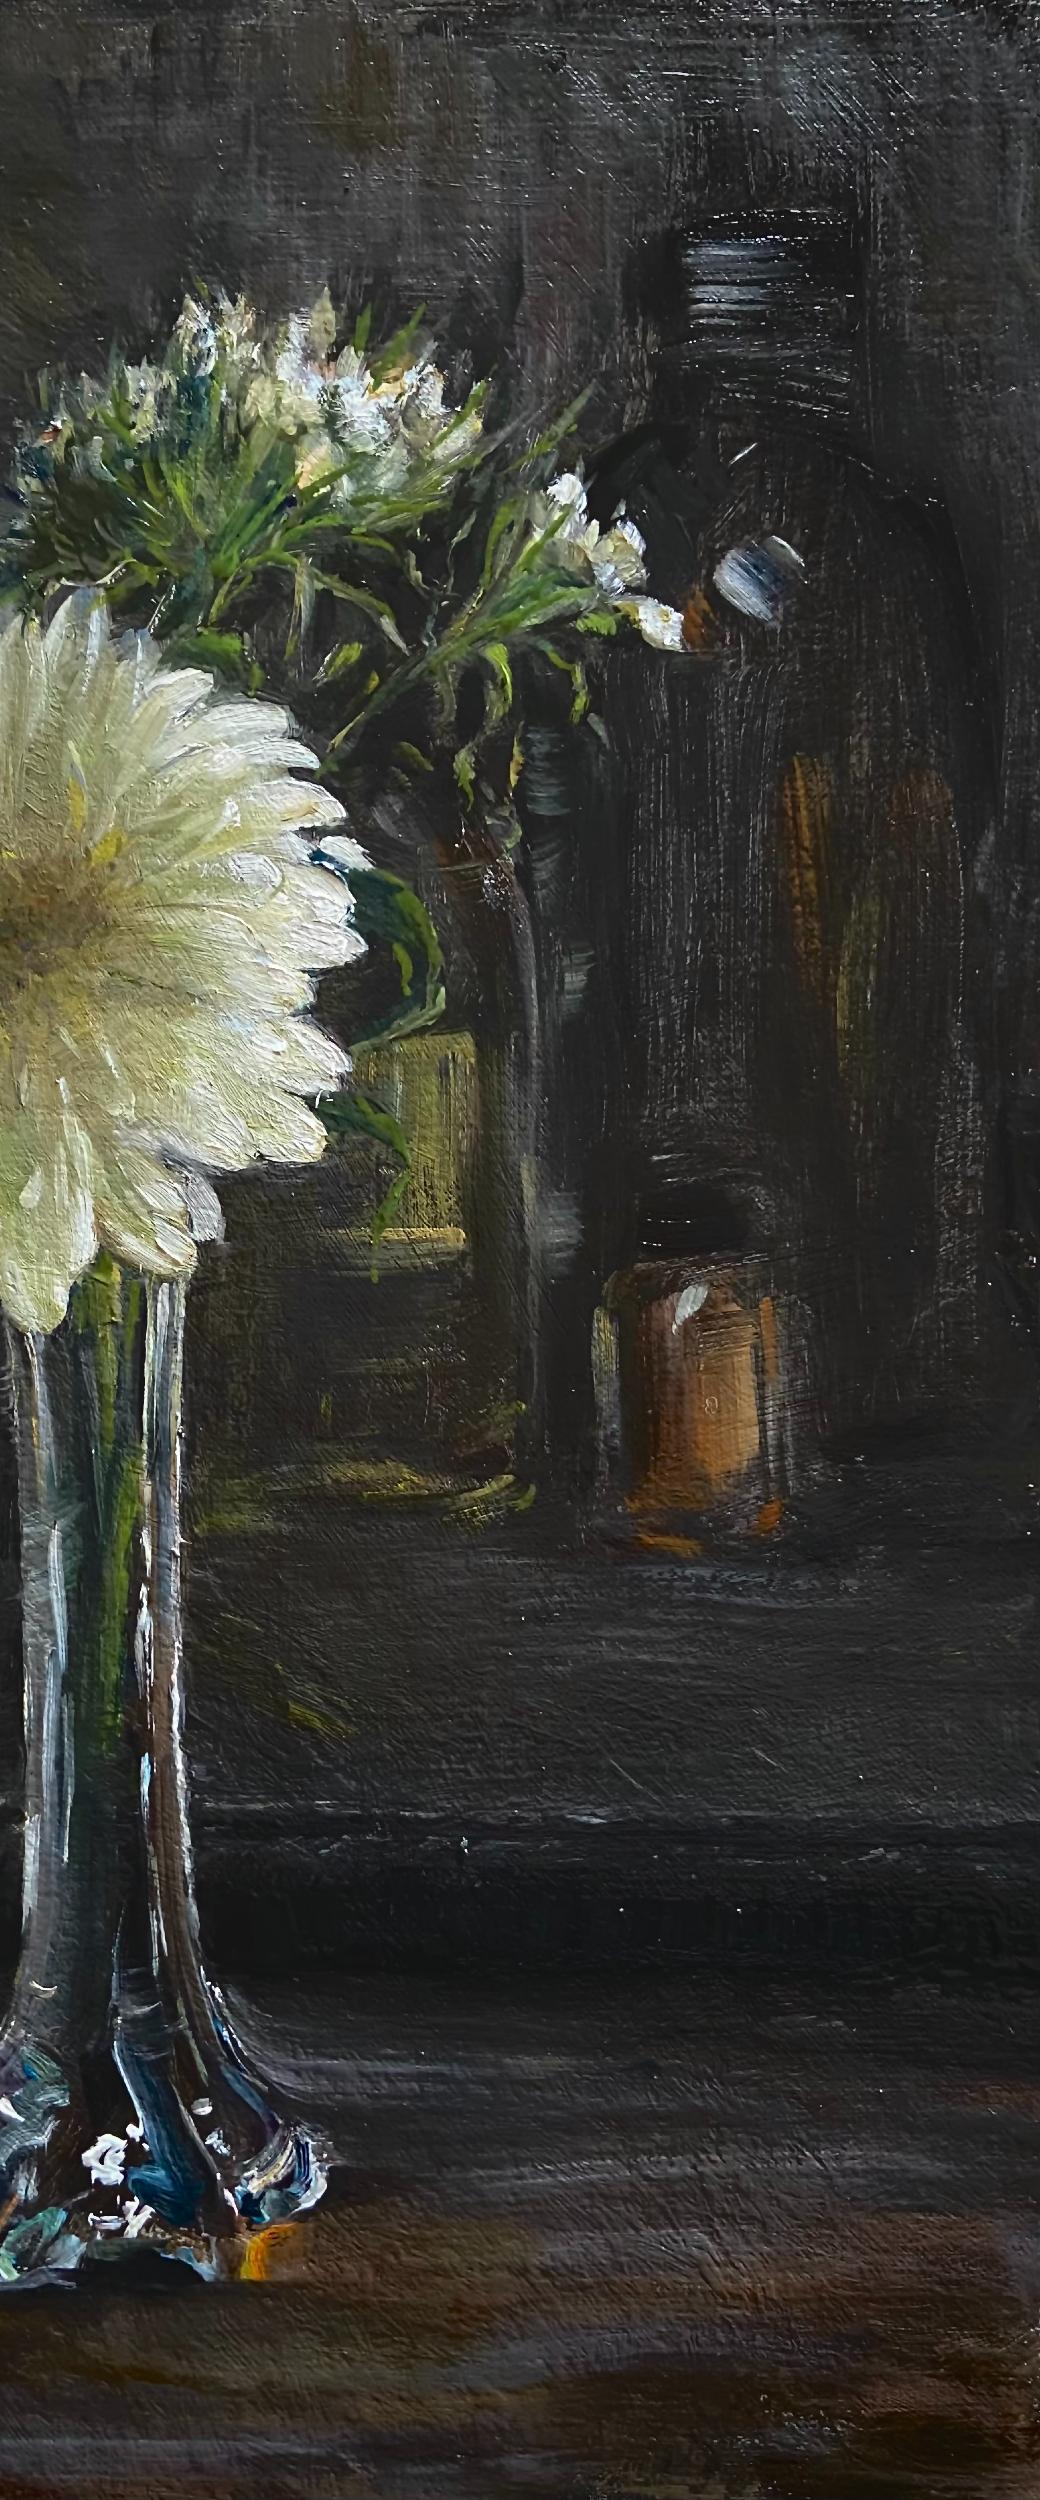 Two Still Lives, Oil Painting, European Artist, Floral Painting, Florence Academy - Black Still-Life Painting by Tina Orsolic Dalessio 